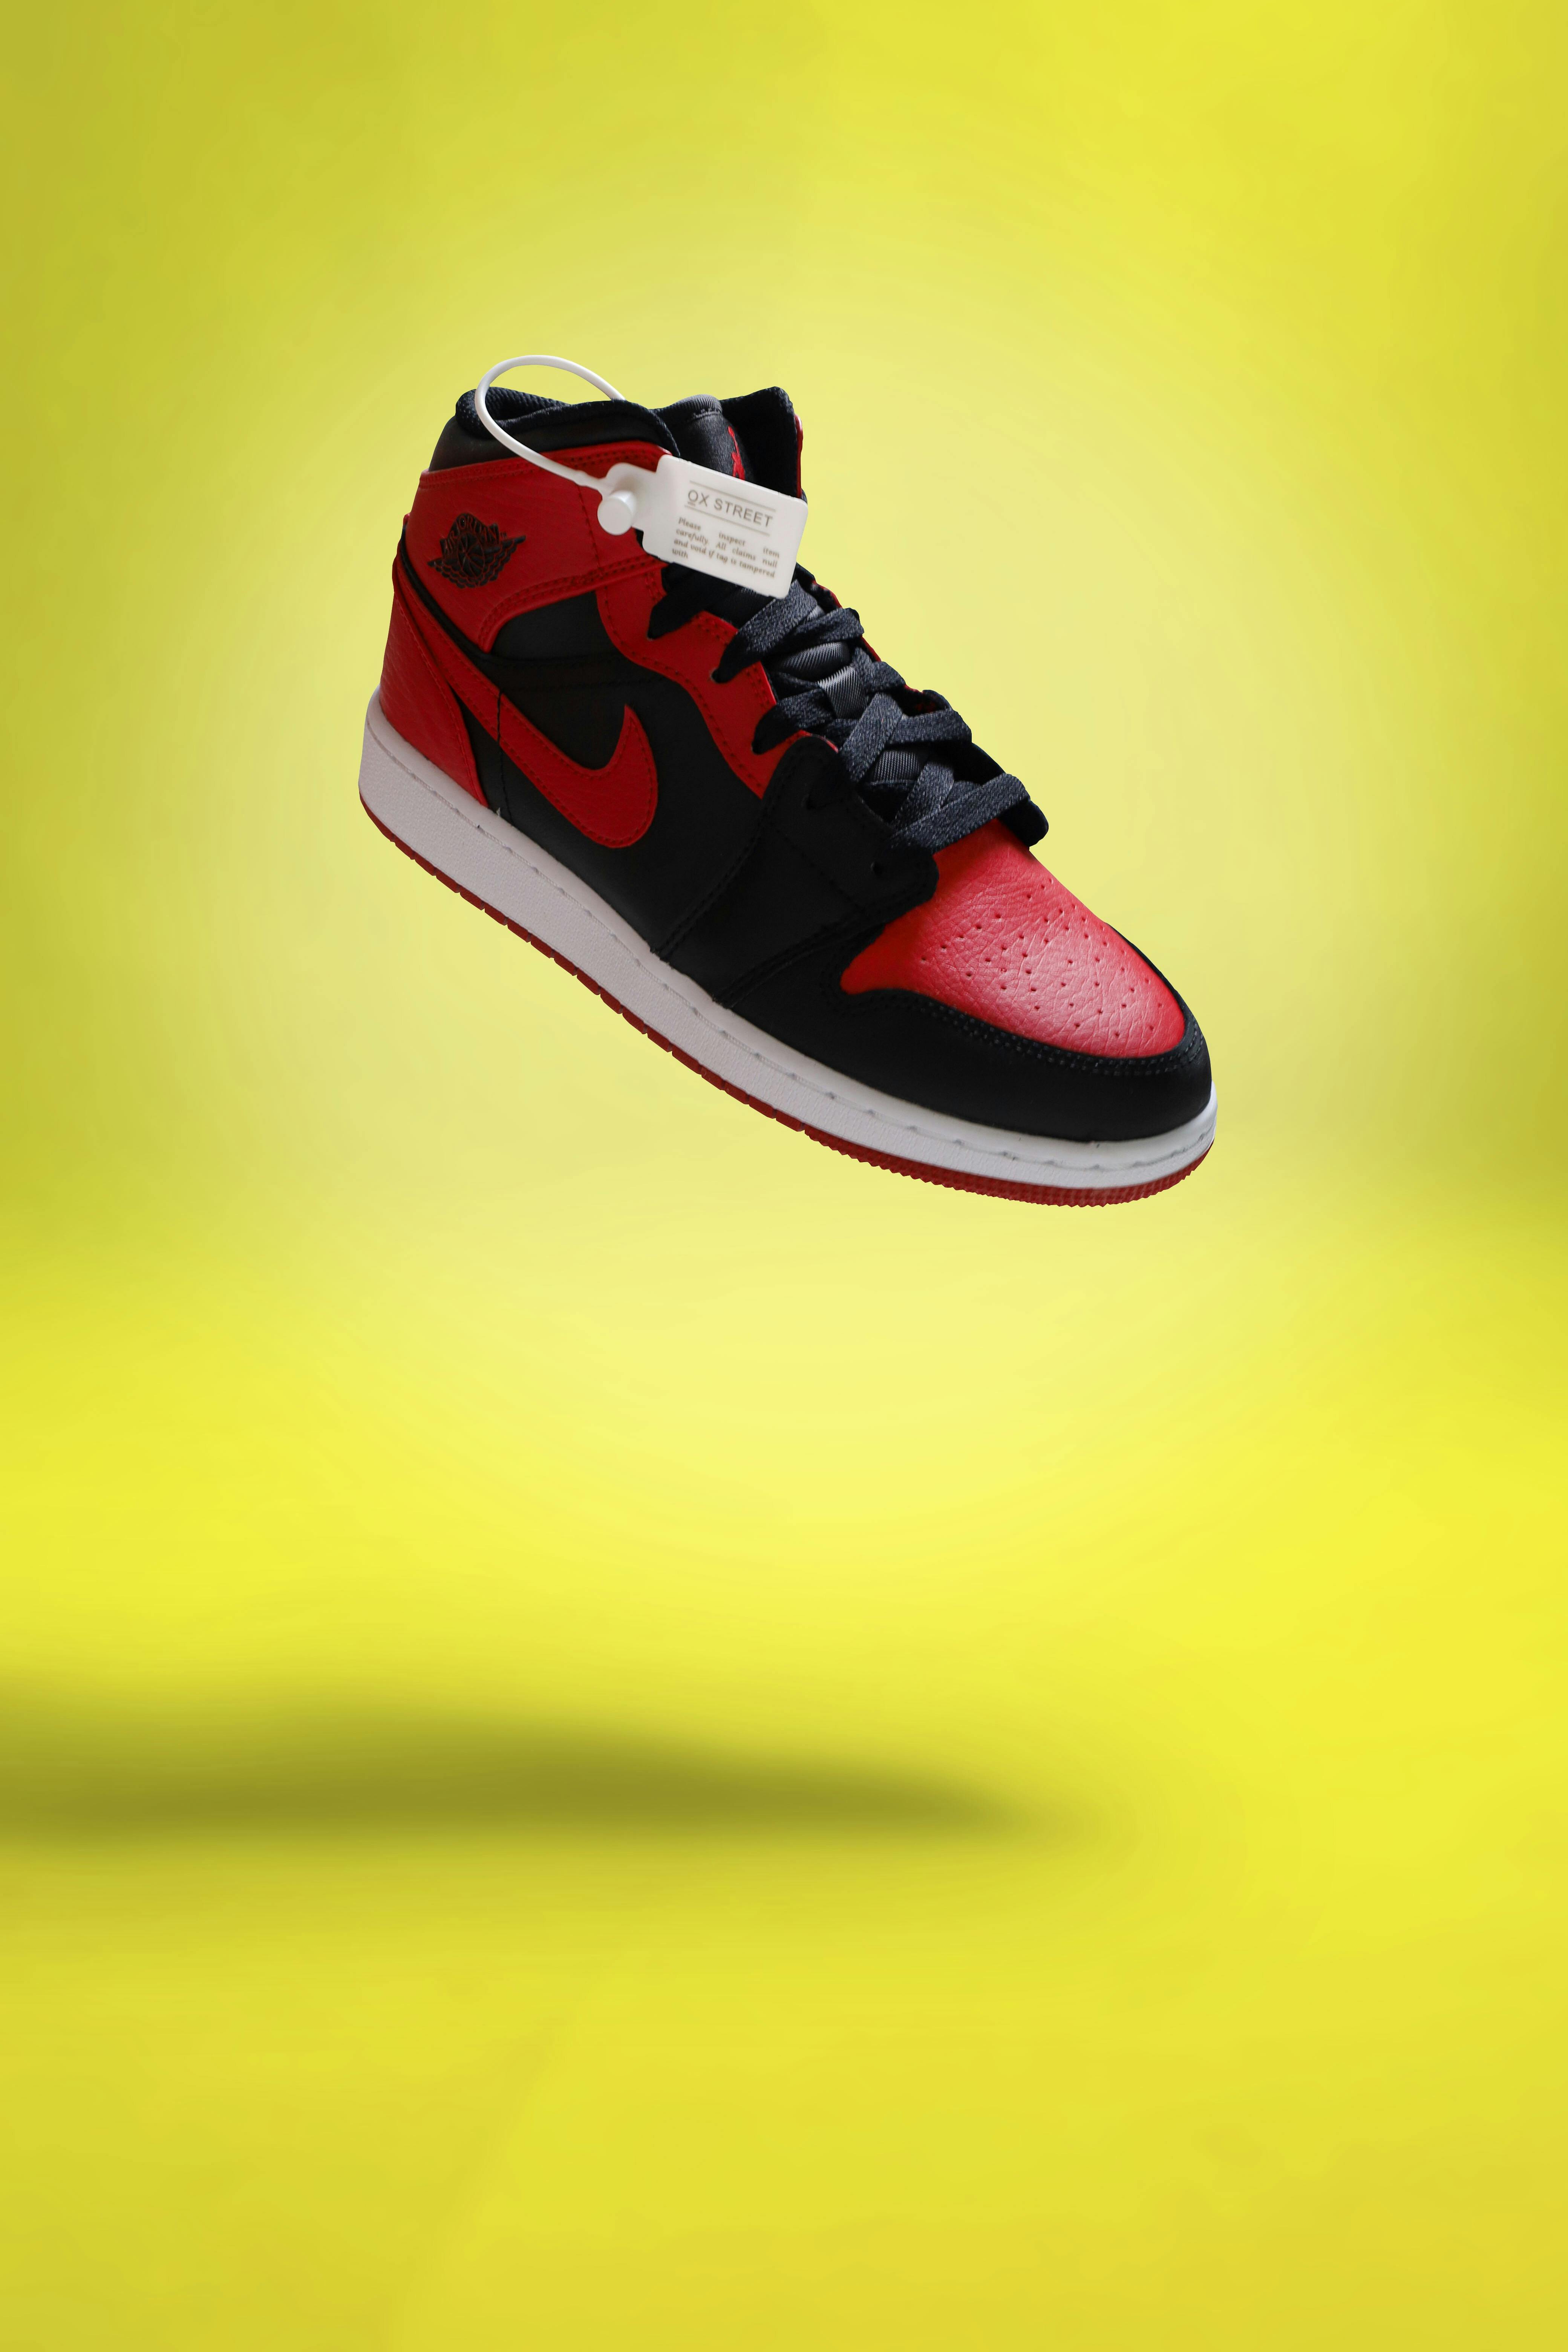 Air Jordans Shoes Come In Red And Black Background, Jordan Shoes Pictures  Background Image And Wallpaper for Free Download